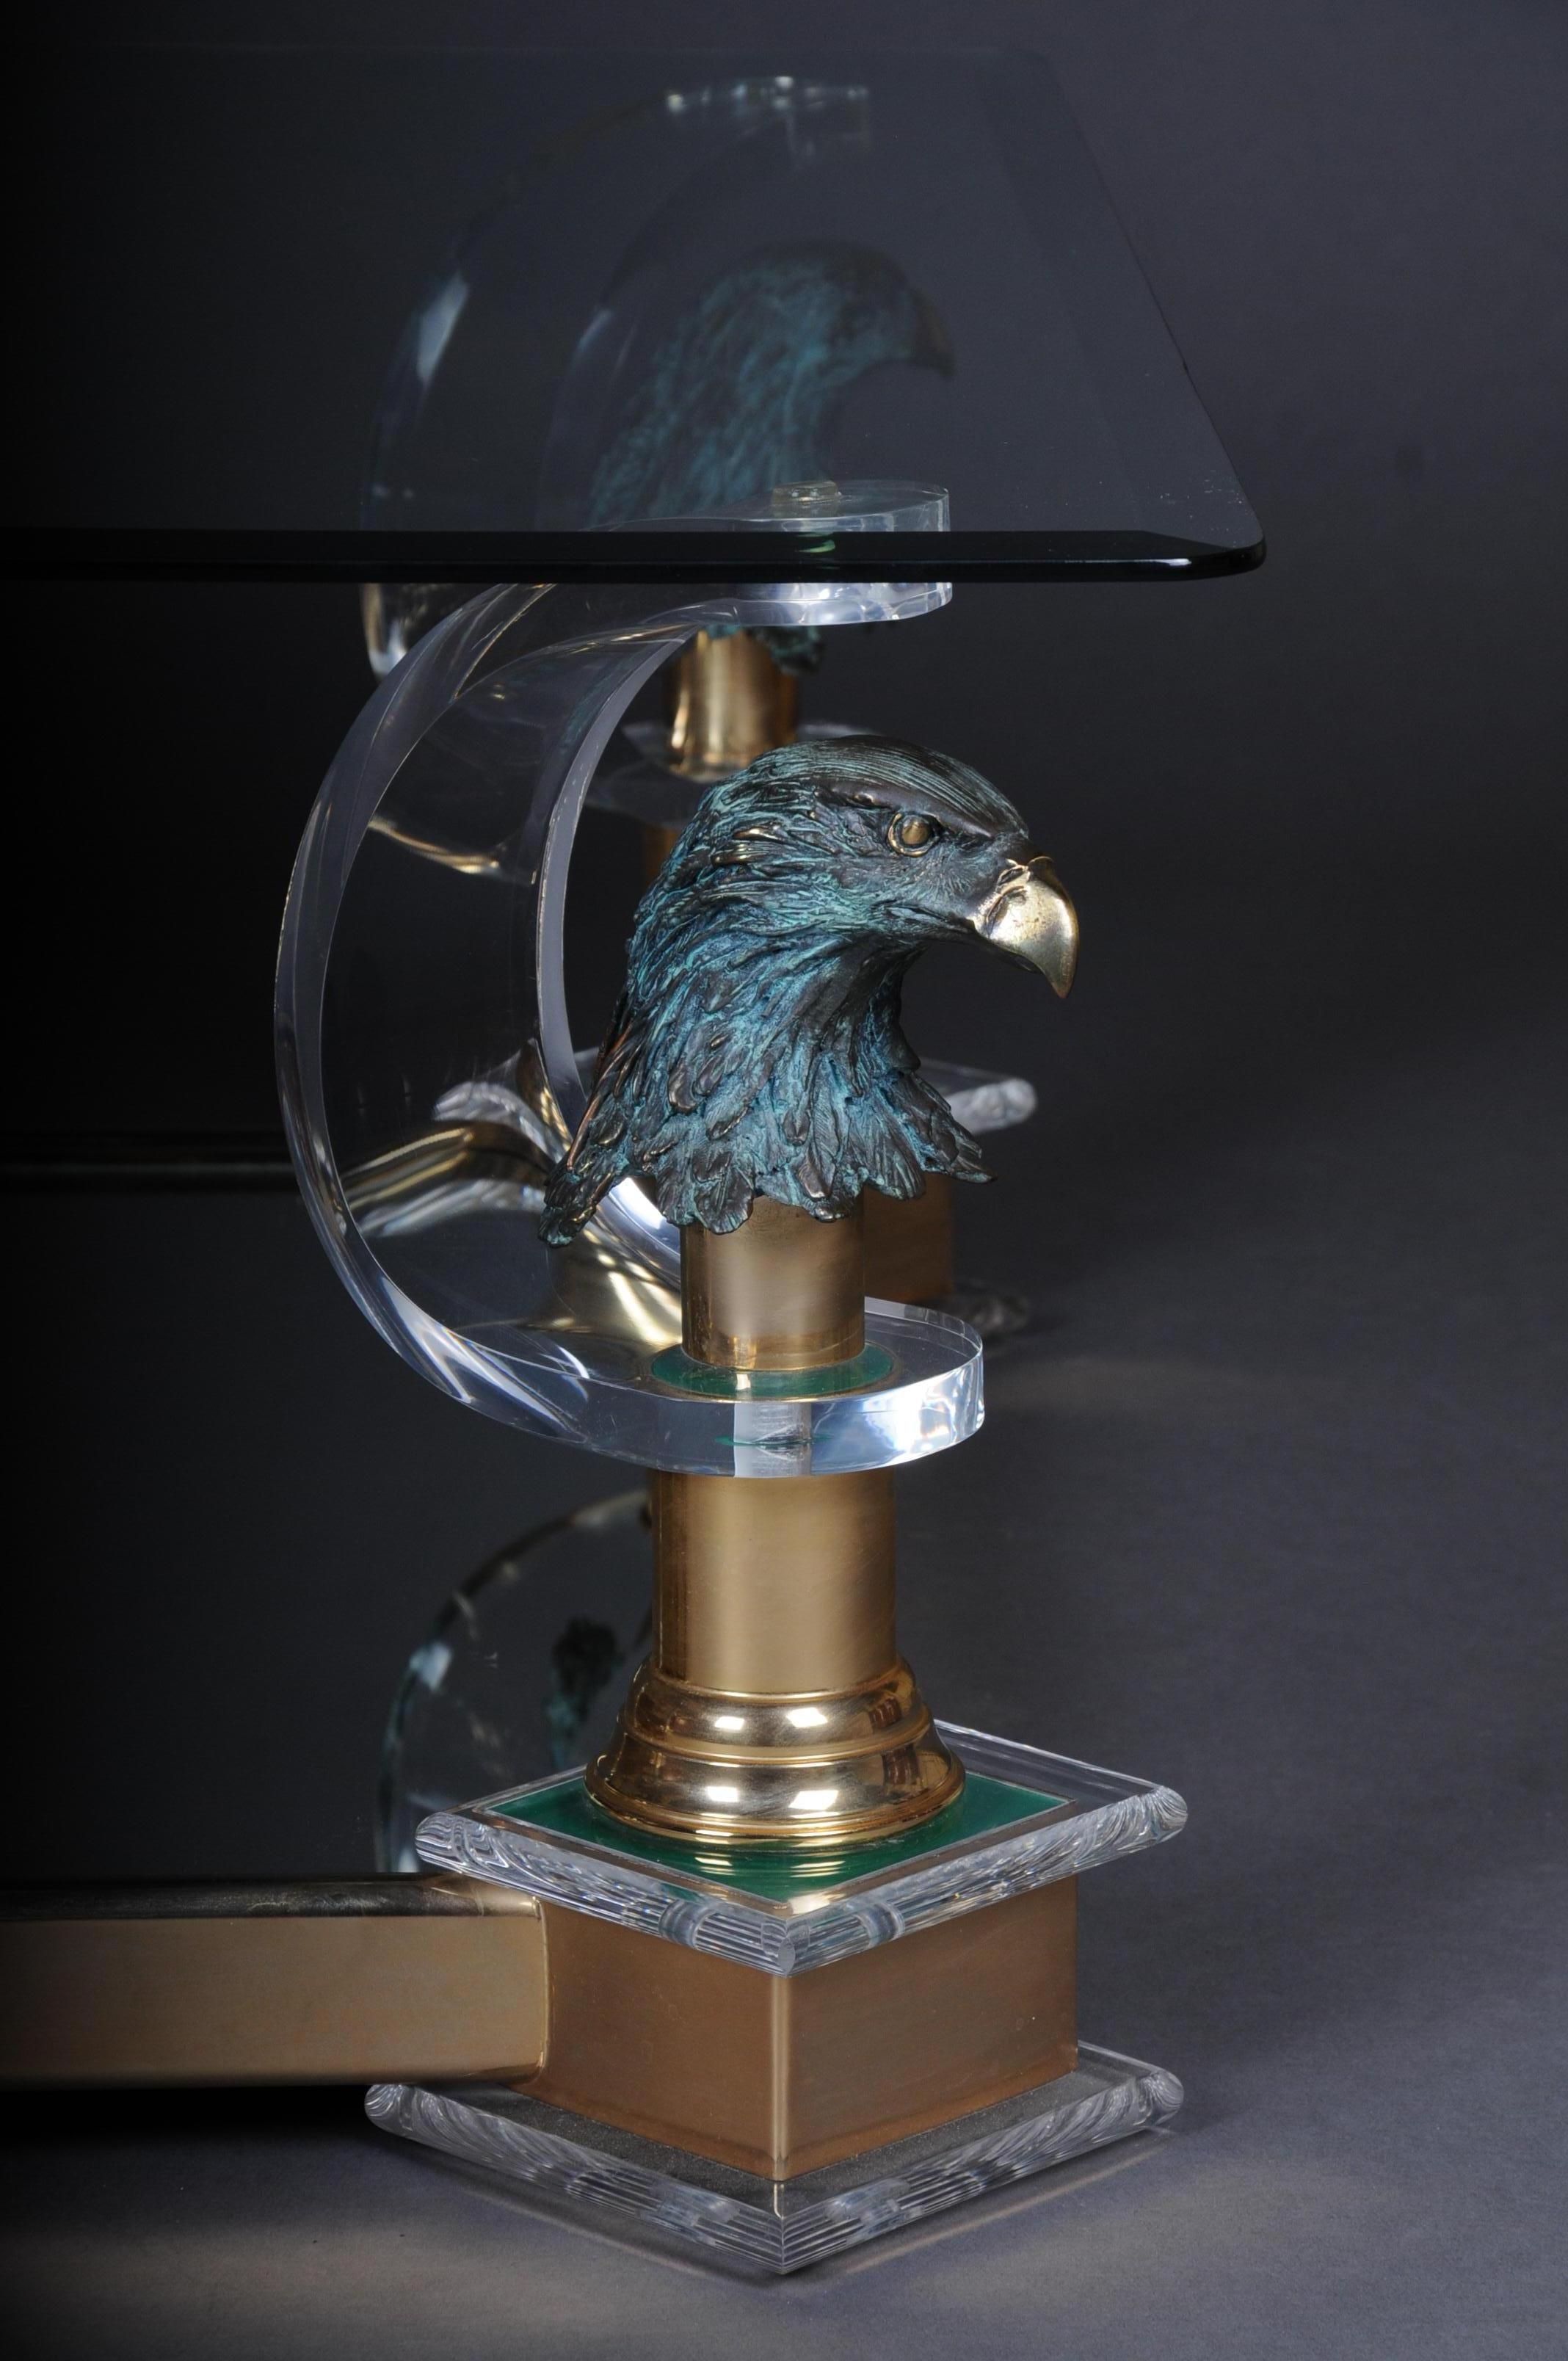 High quality designer coffee table made of high quality acrylic and eagle heads by Maison Charles.
Mirrored table bottom. Faceted glass plate. High quality processed eagle heads on each column shaft.
Very decorative and an absolute highlight in